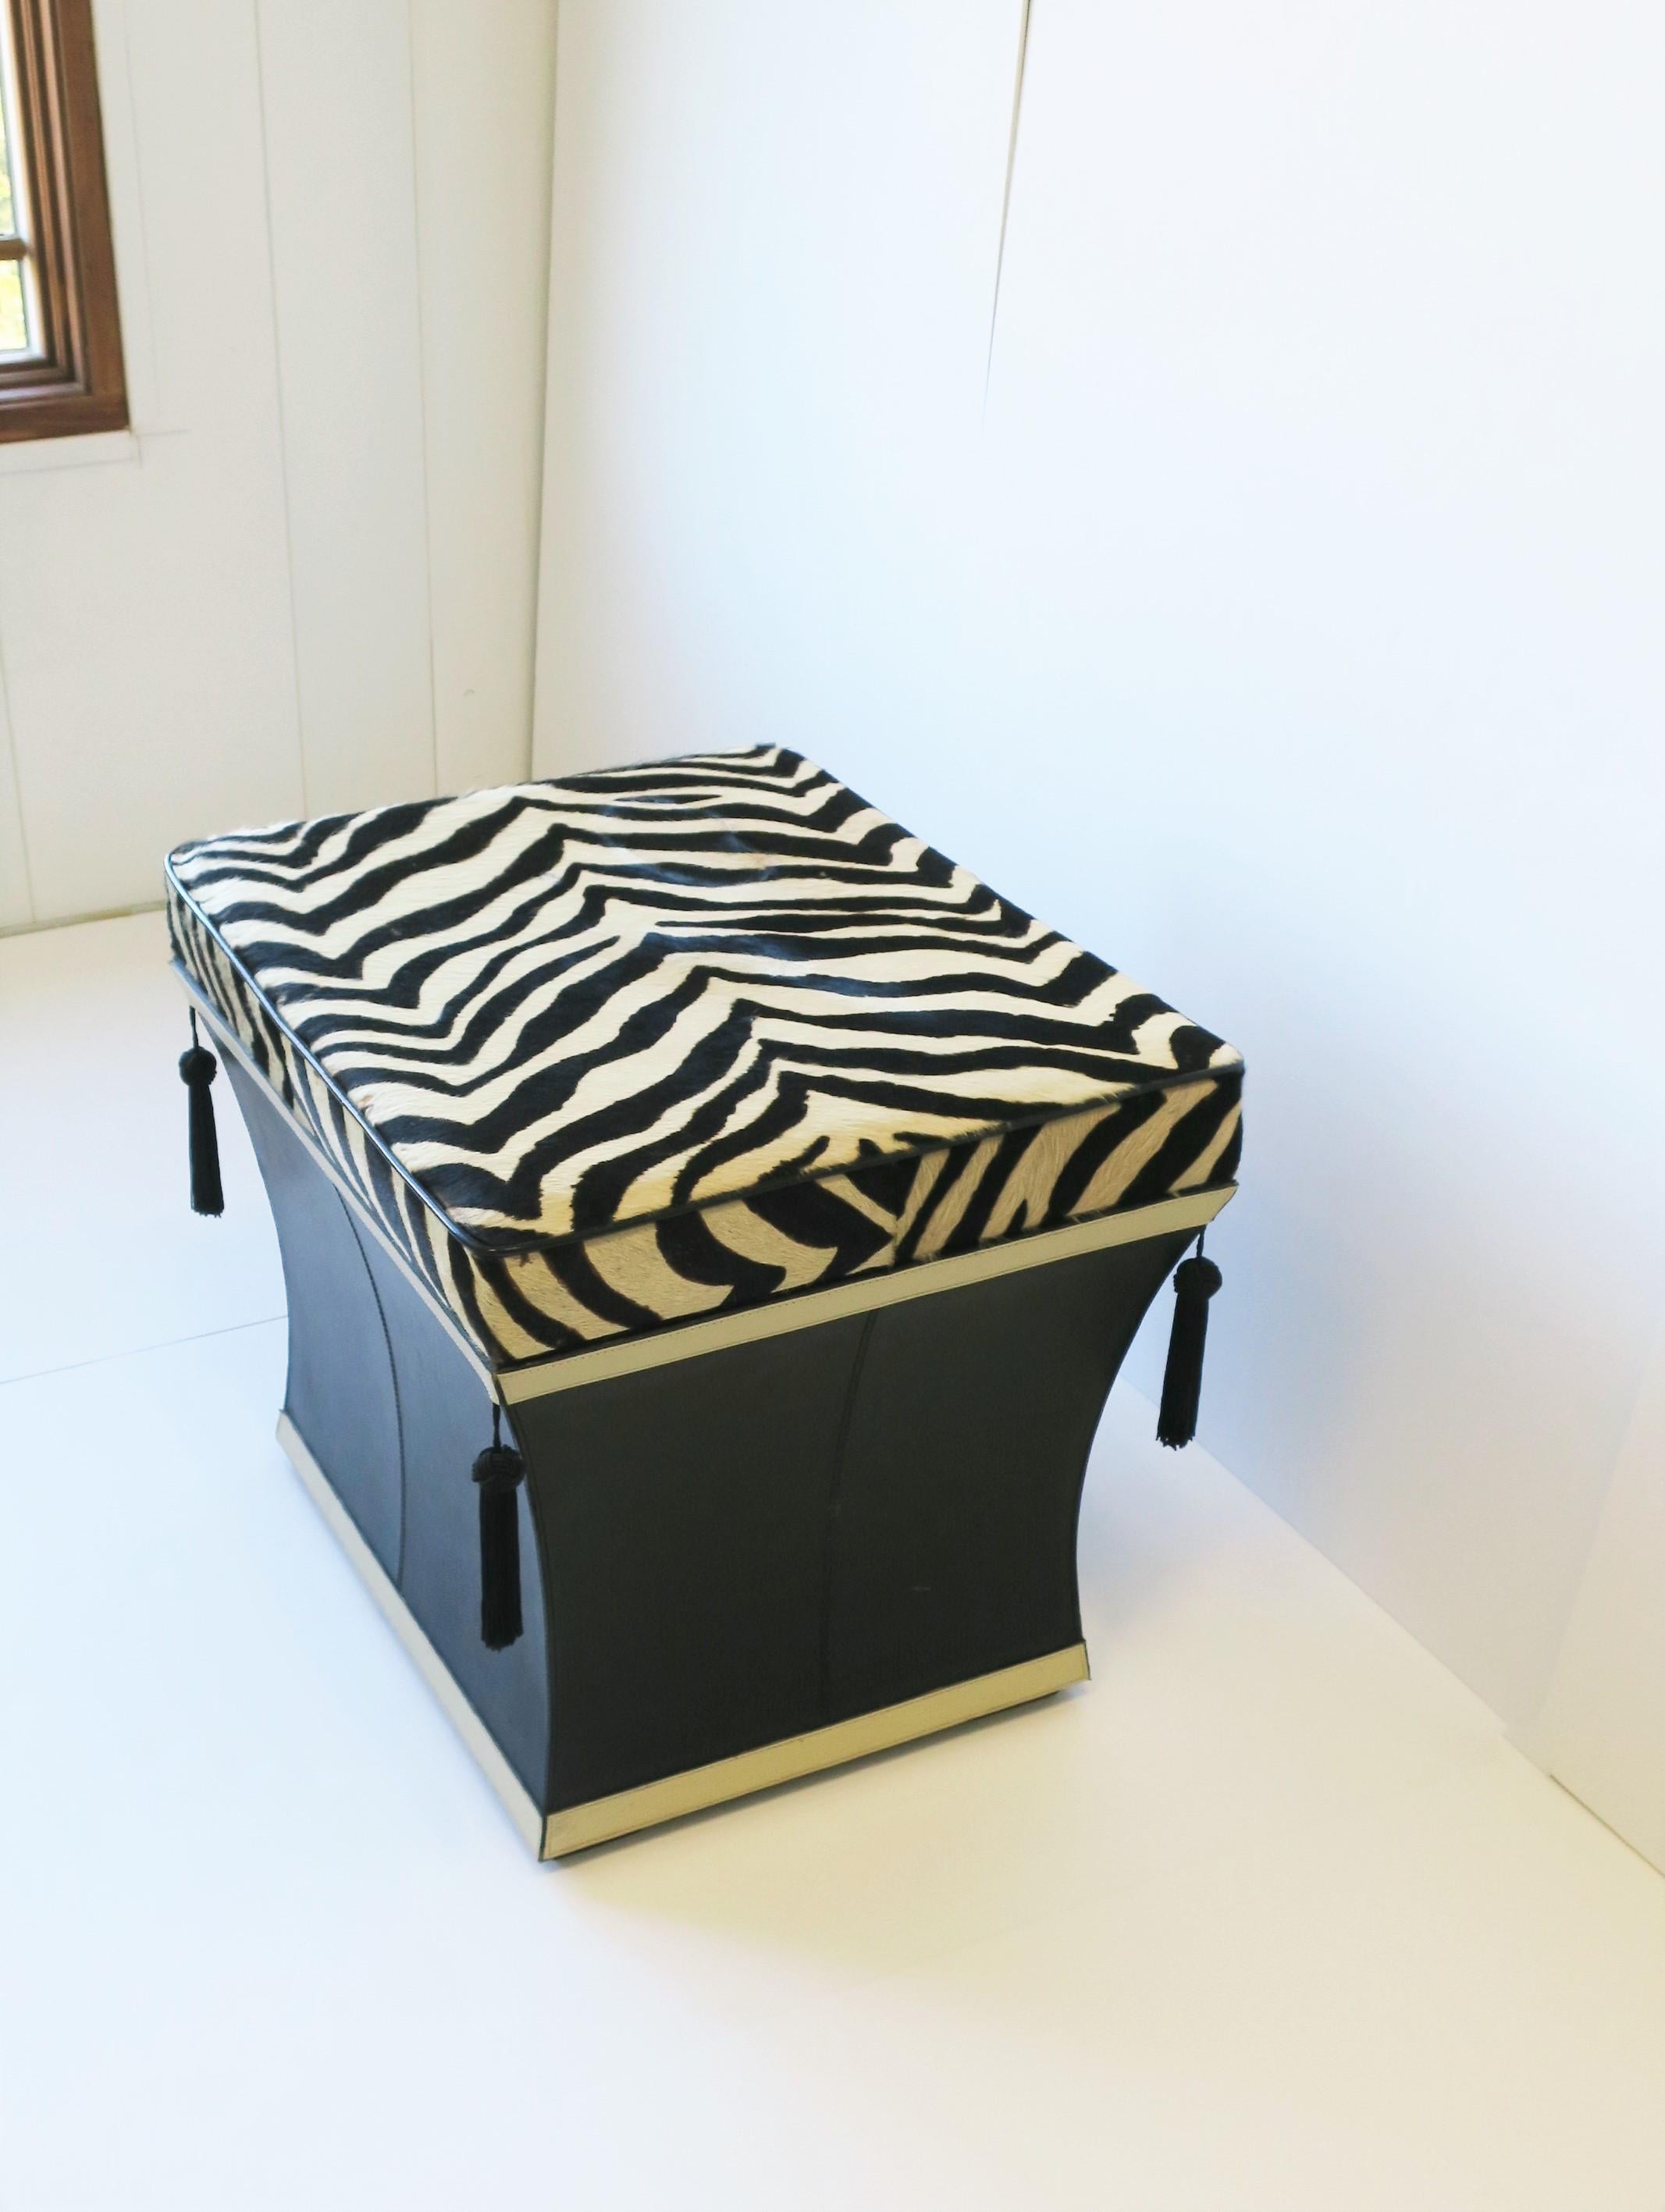 Zebra Hide Bench Stool with Storage Trunk and Tassels, circa 1980s 1990s For Sale 1